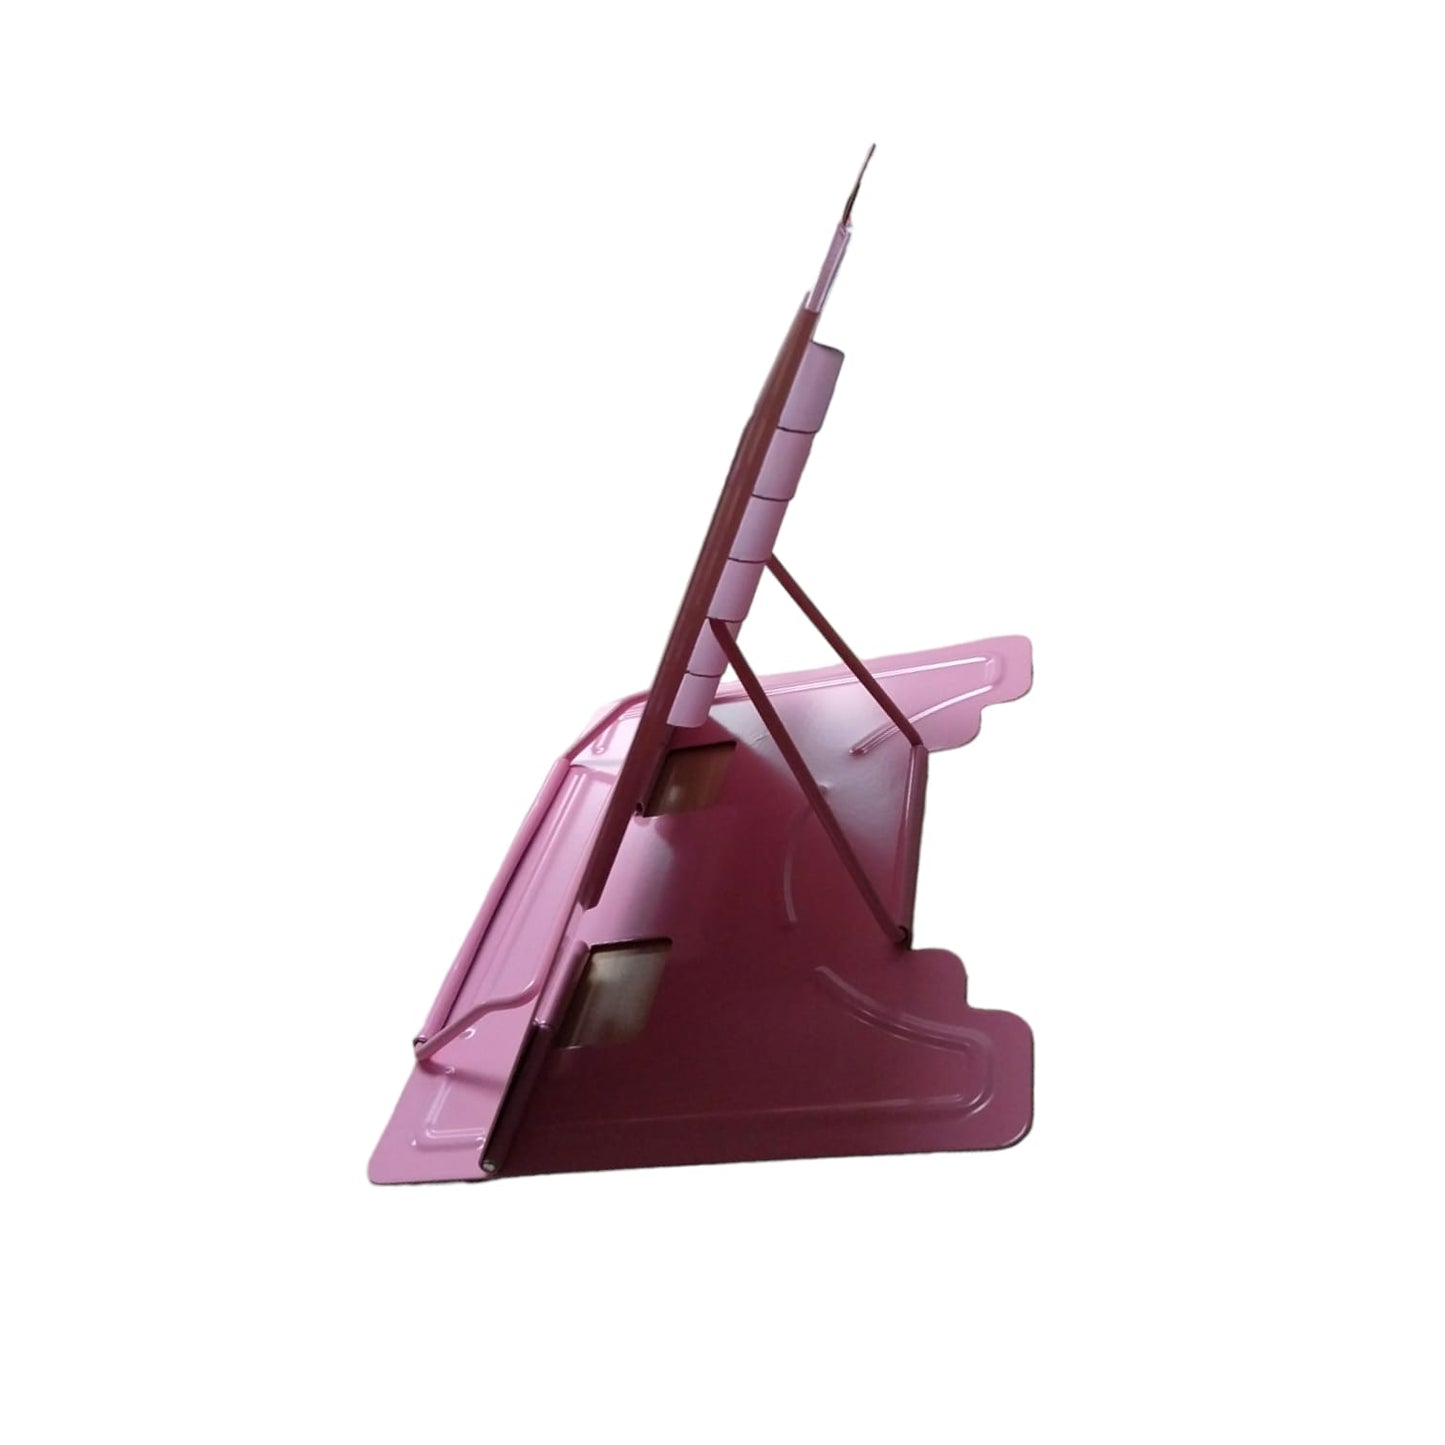 Adjustable Portable Metal Book Stand 227 x 194 x 28mm